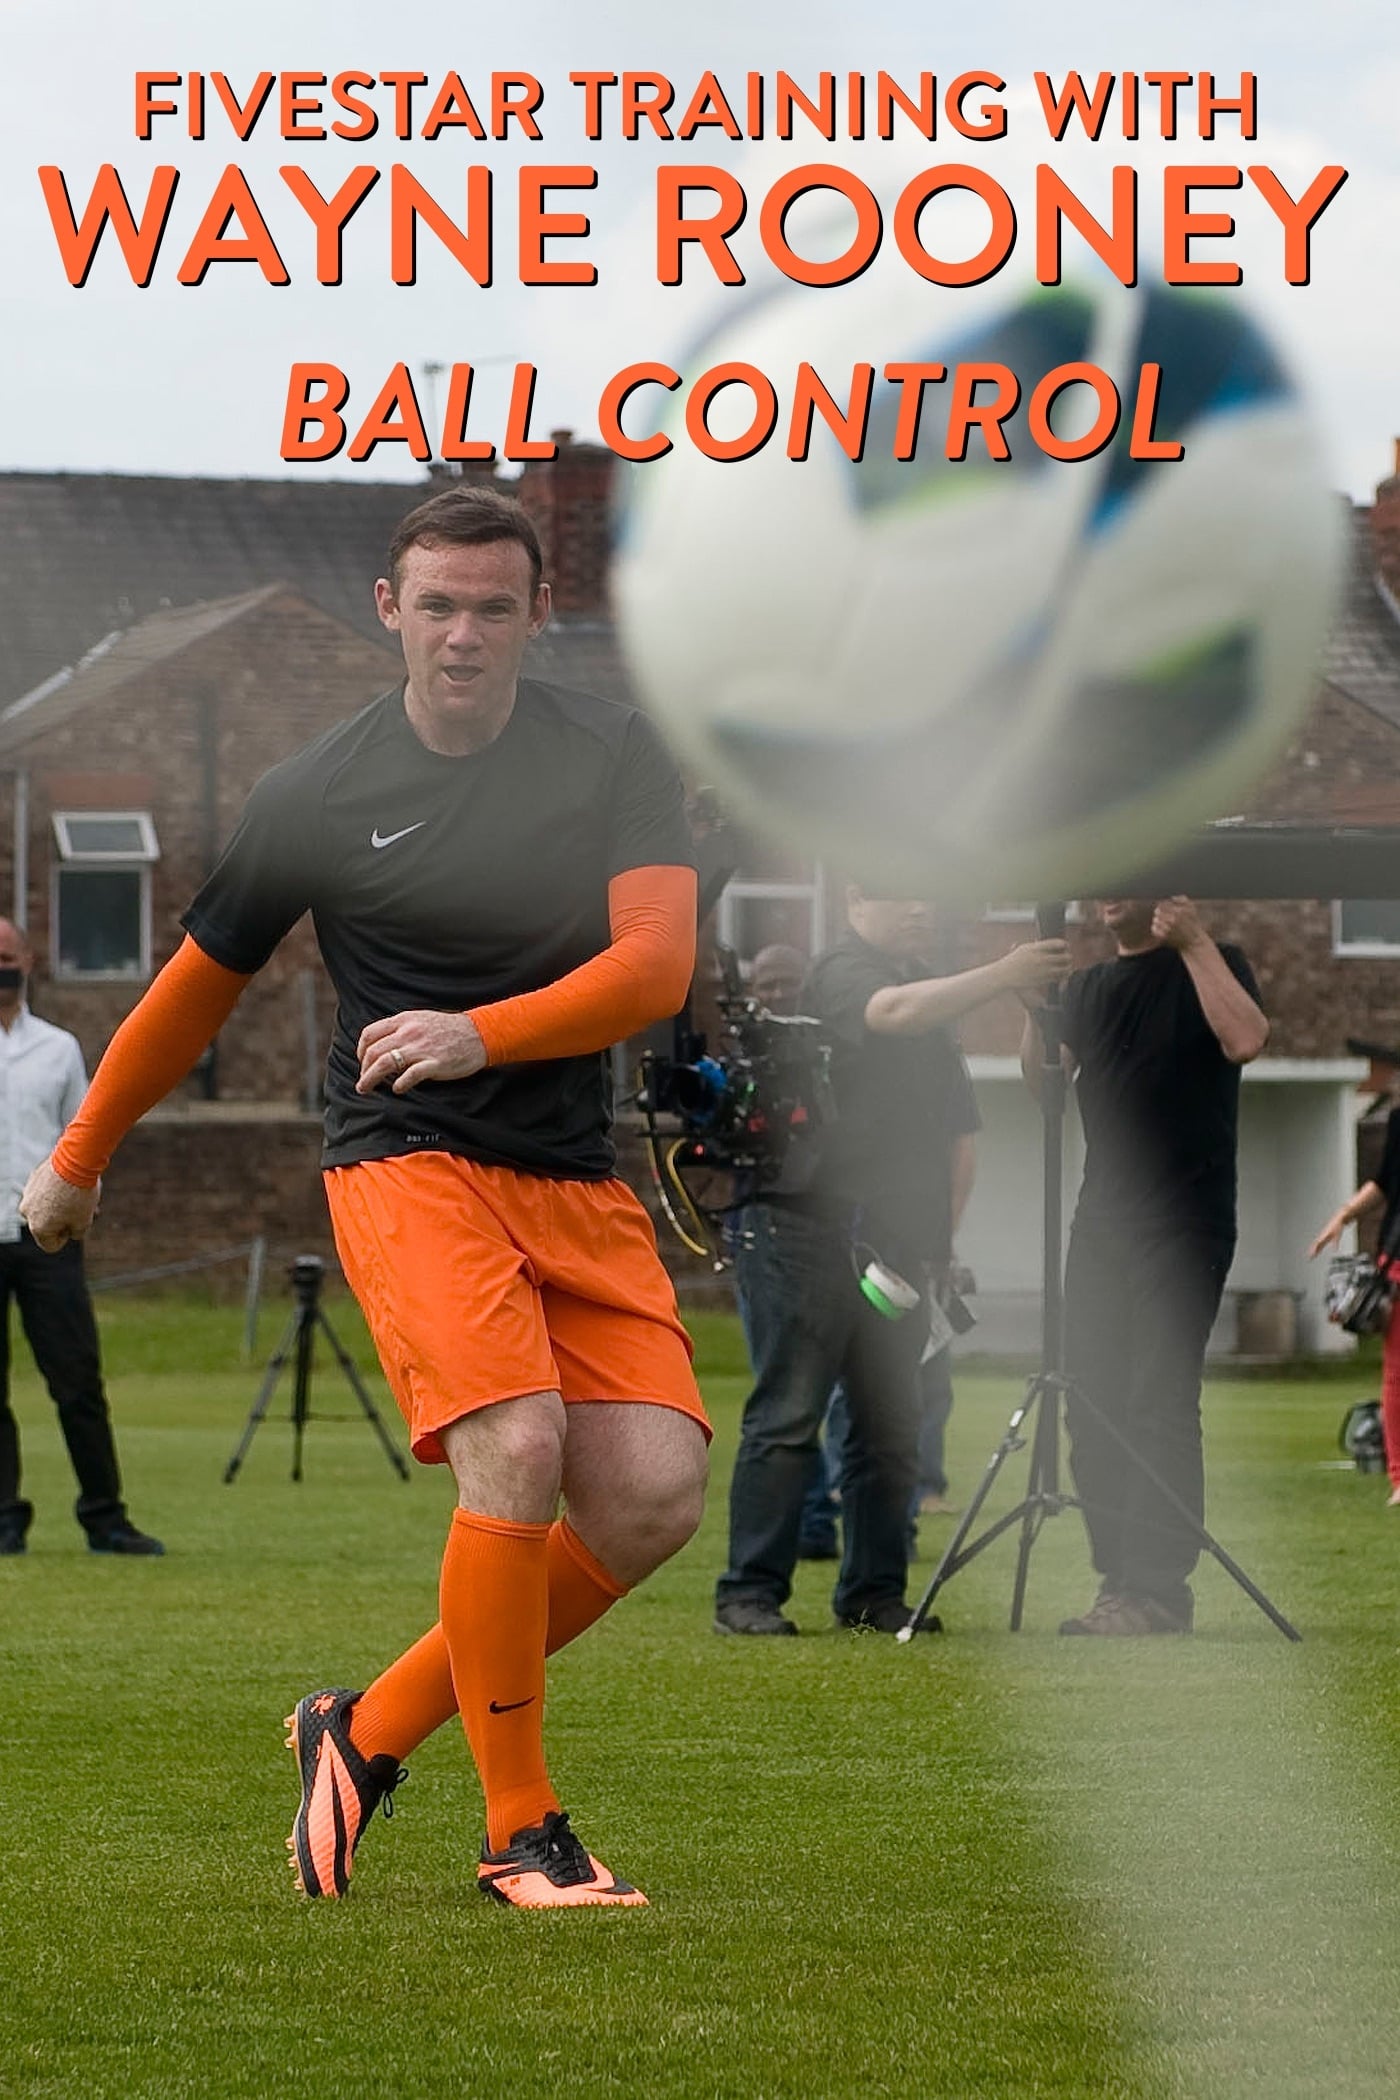 Fivestar Training with Wayne Rooney: Ball Control on FREECABLE TV